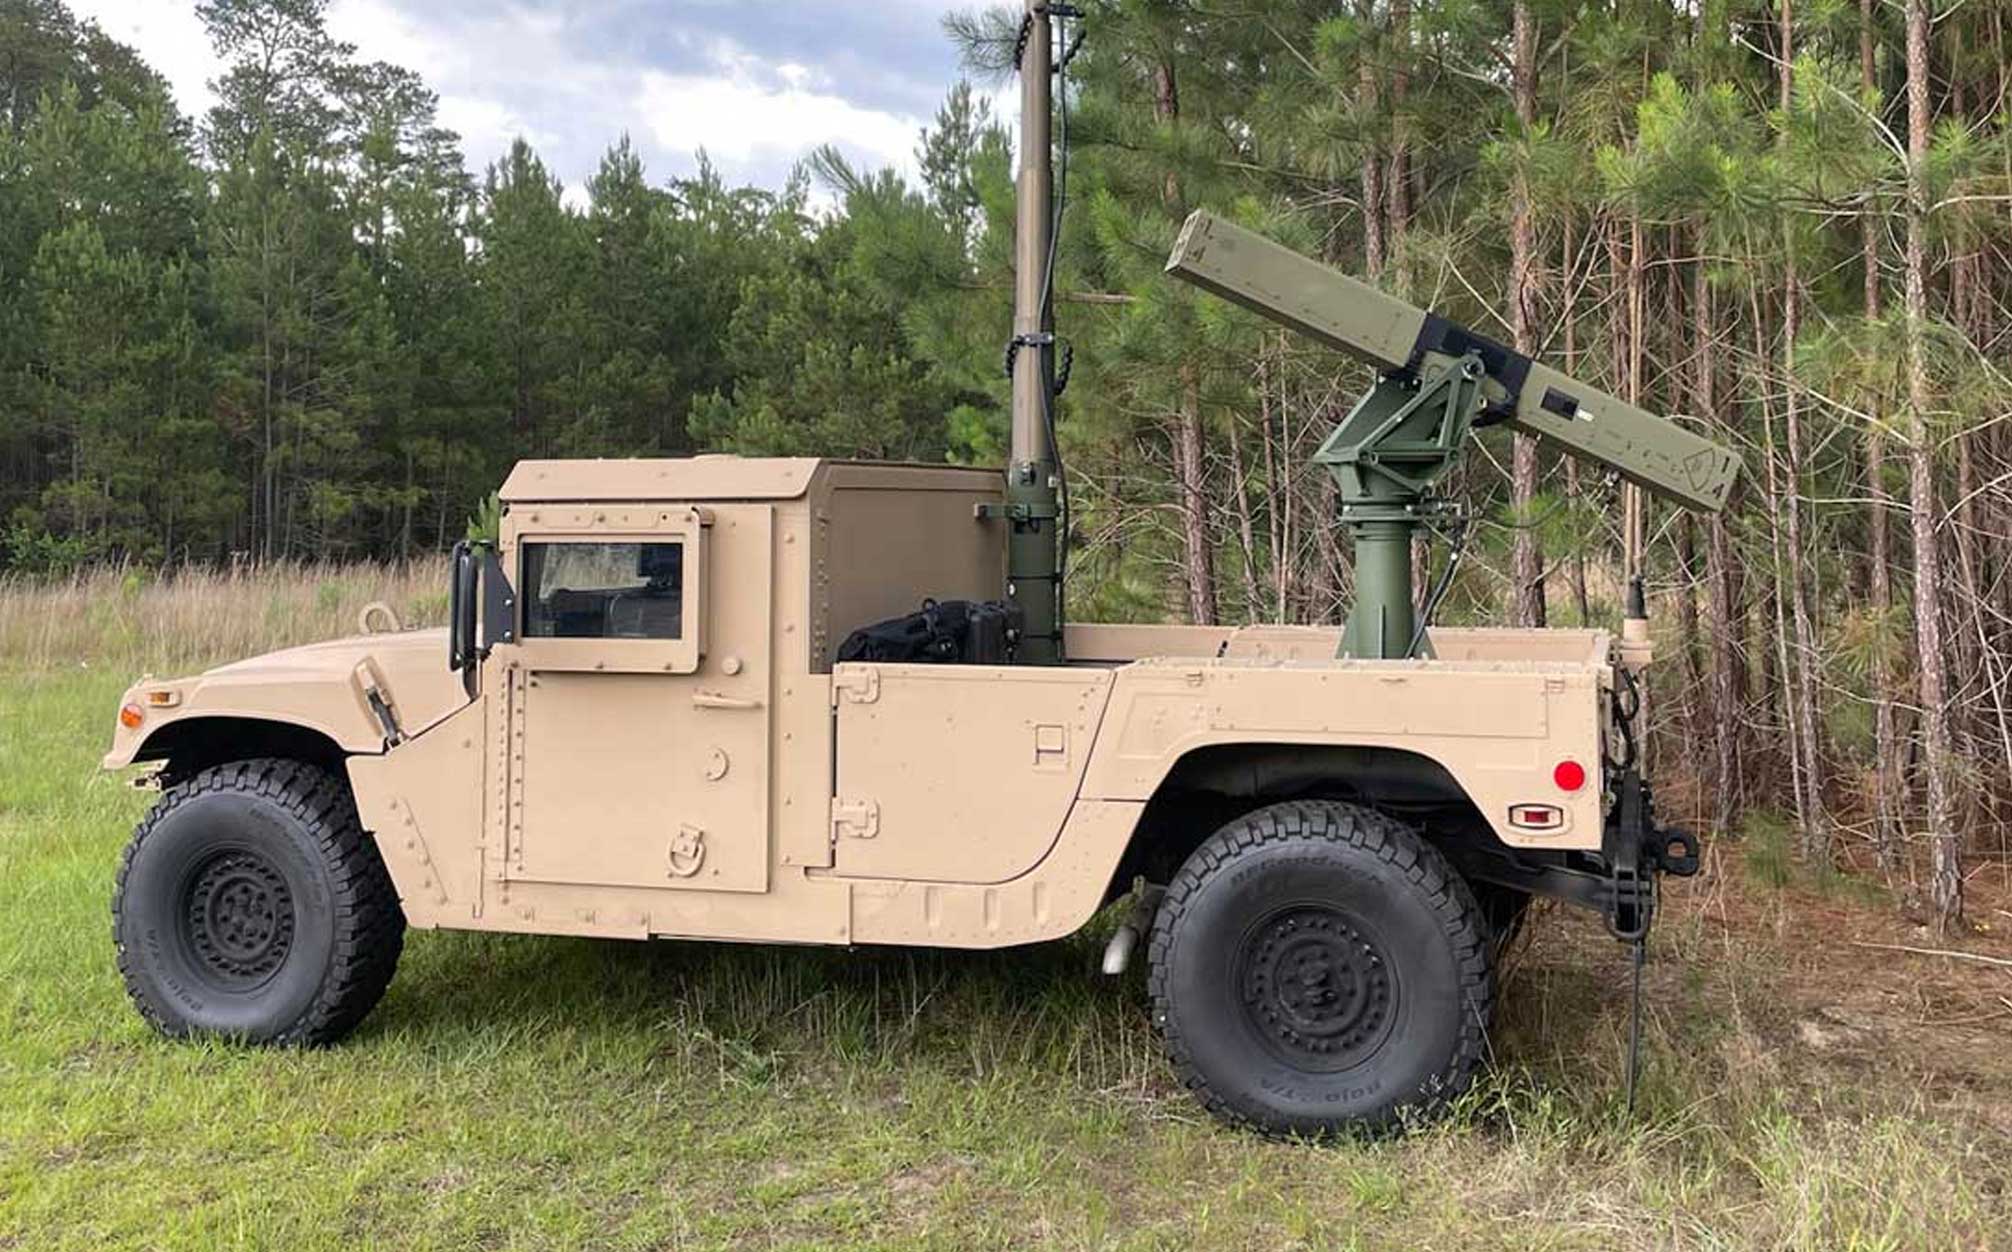 L3Harris has delivered all Vehicle Agnostic Modular Palletized ISR Rocket Equipment - or VAMPIRE™ - counter UAS systems on schedule to strengthen Ukrainian security defense efforts. L3Harris photos.  